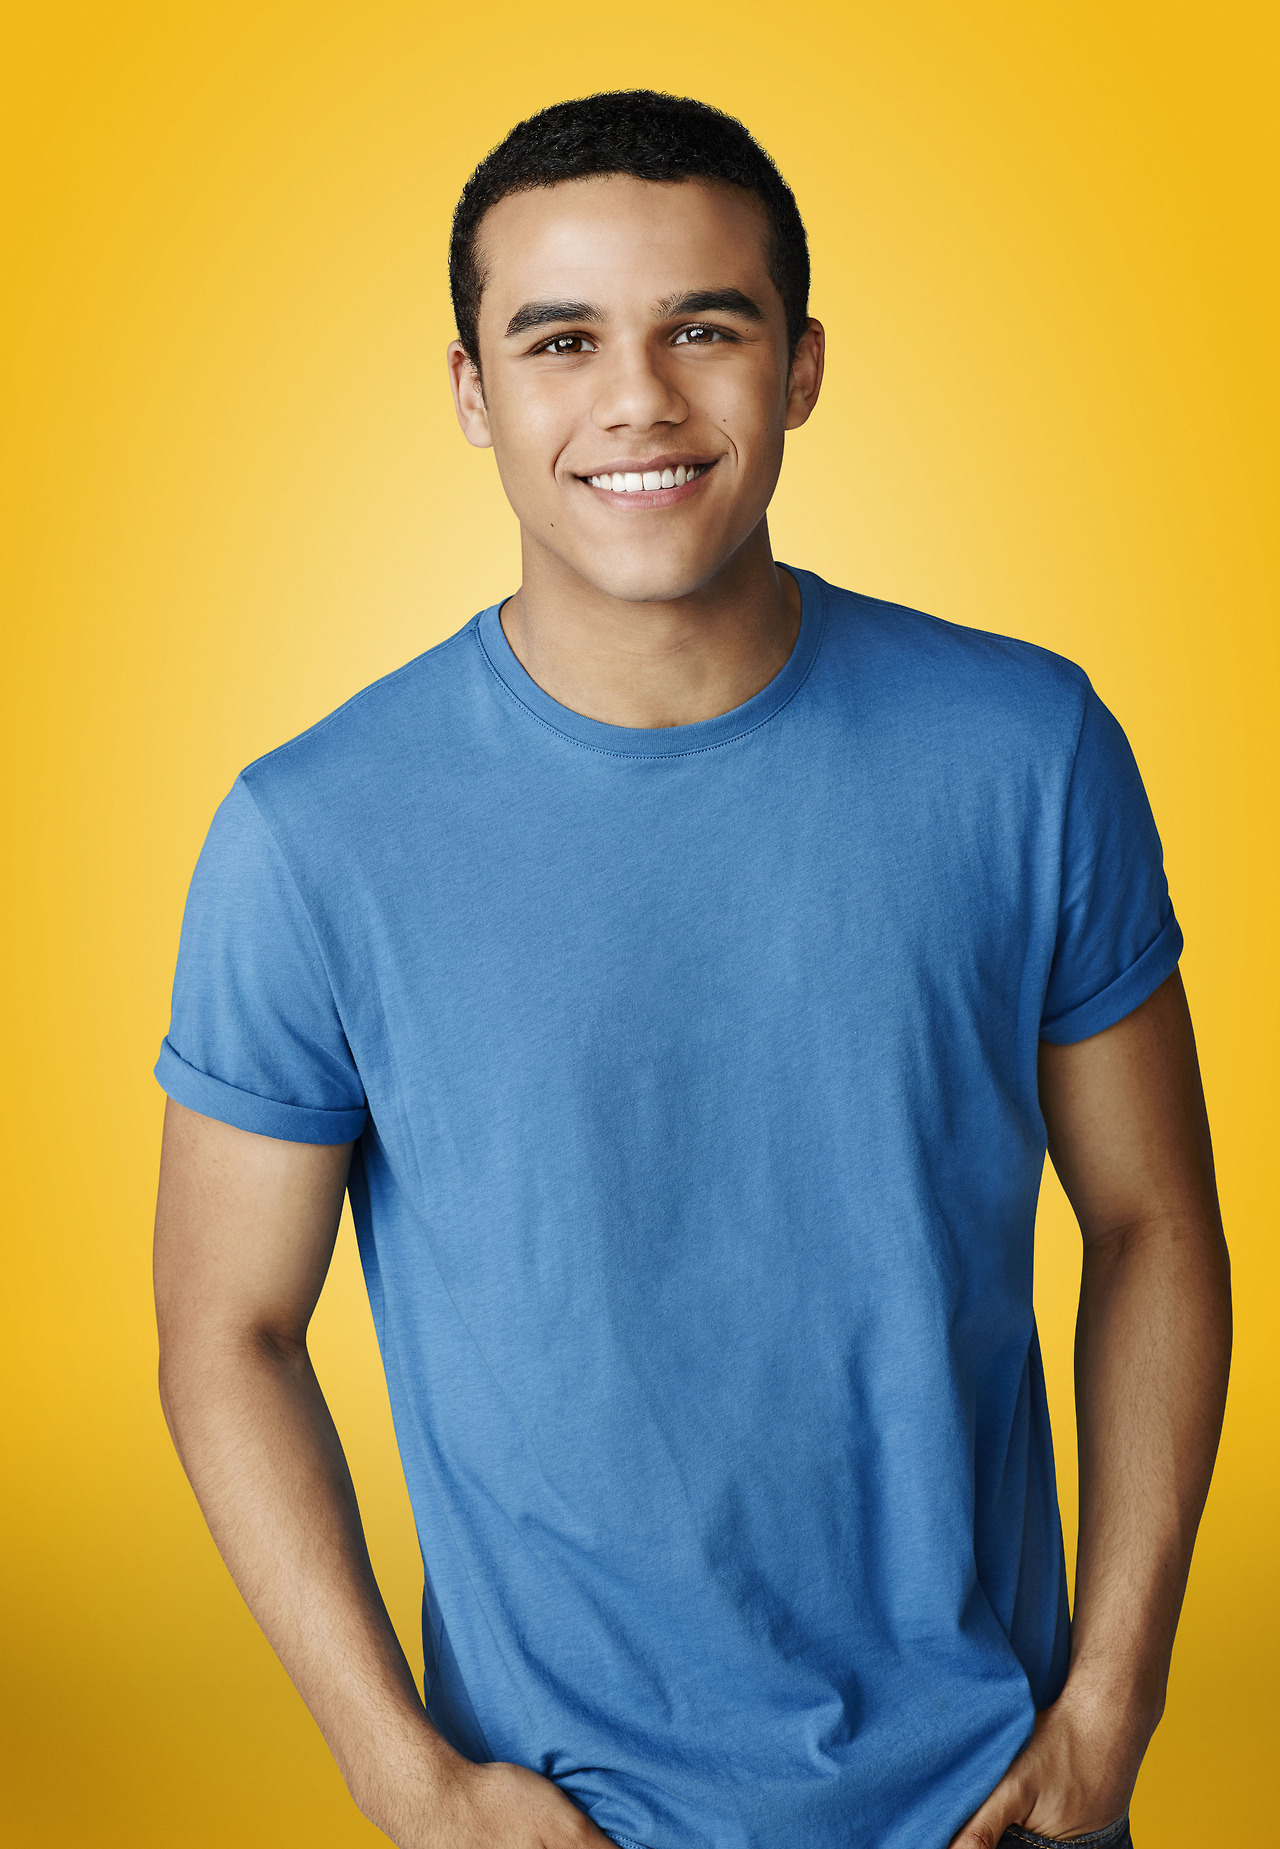 Everything you need to know about Jake Puckerman from 'Glee'. 